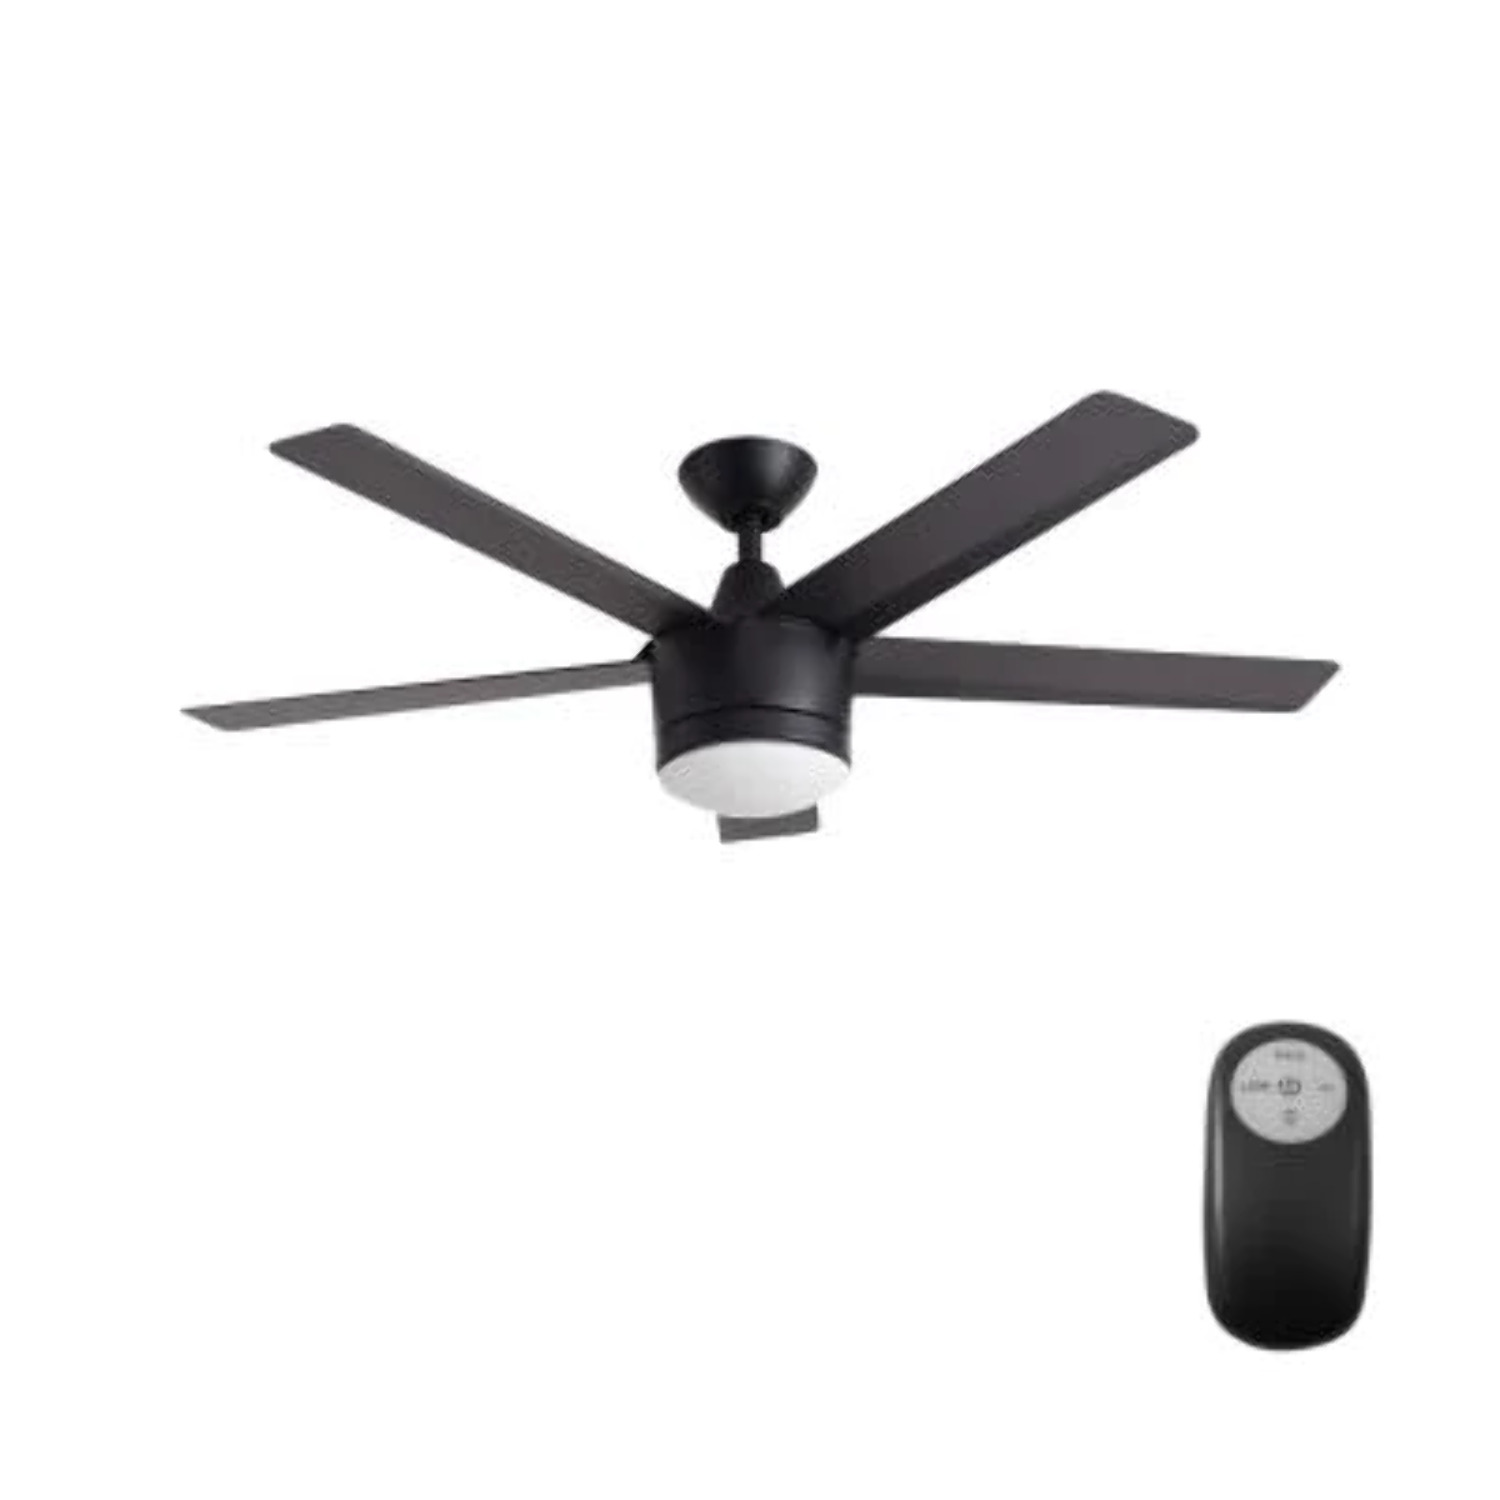 Home Decorators Merwry 52 Inches Integrated LED Indoor Matte Remote Control Ceiling Fan Matte Black - image 2 of 2